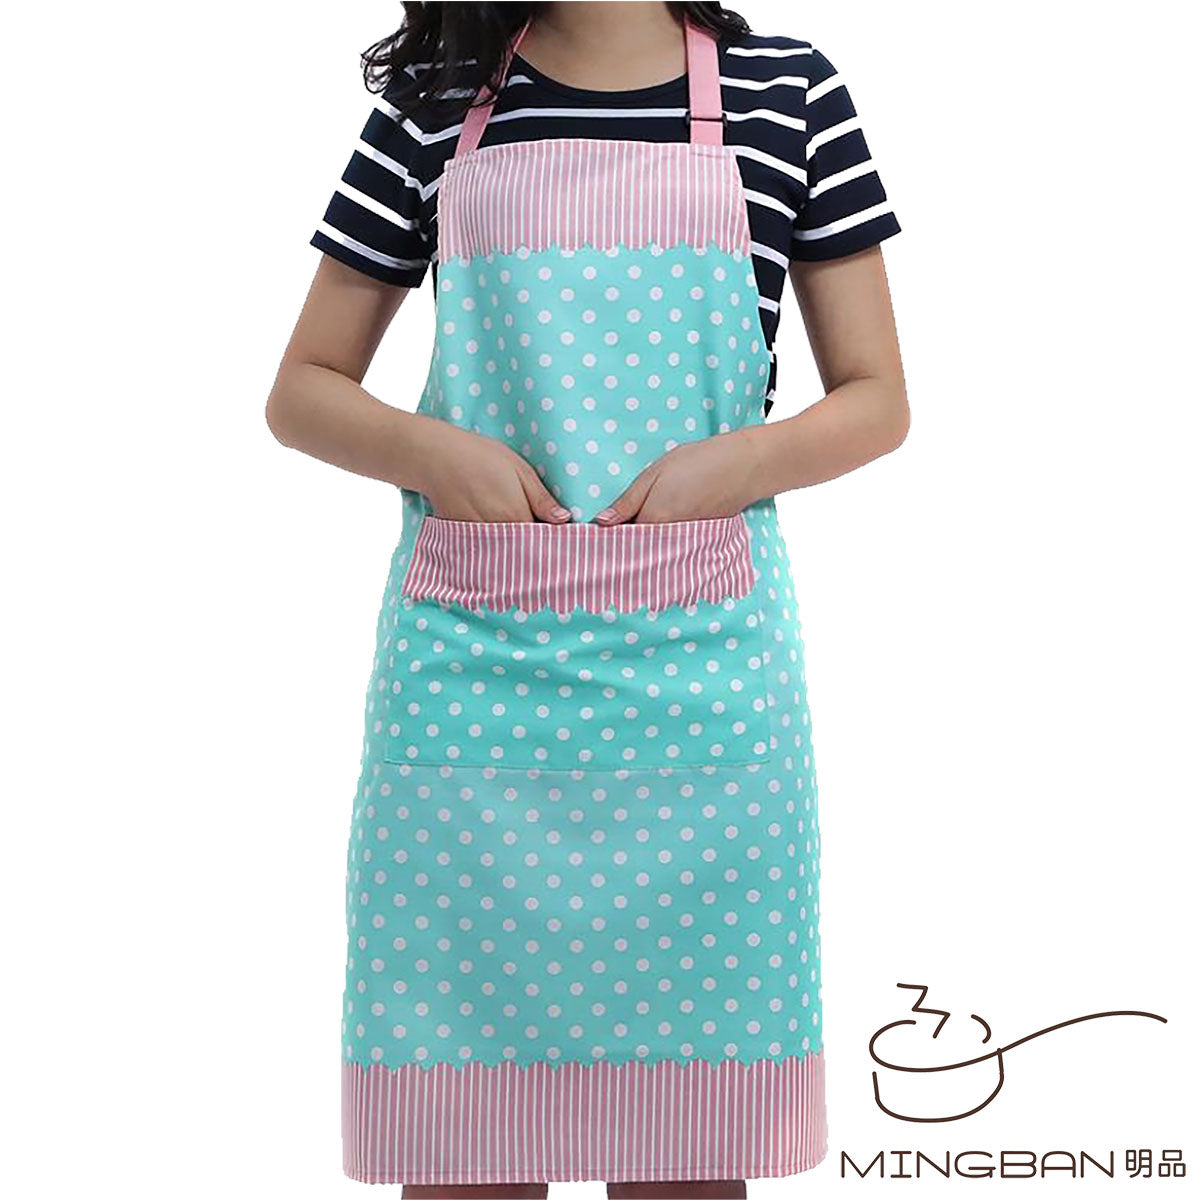 Apron with Pockets - Blue Cupcake